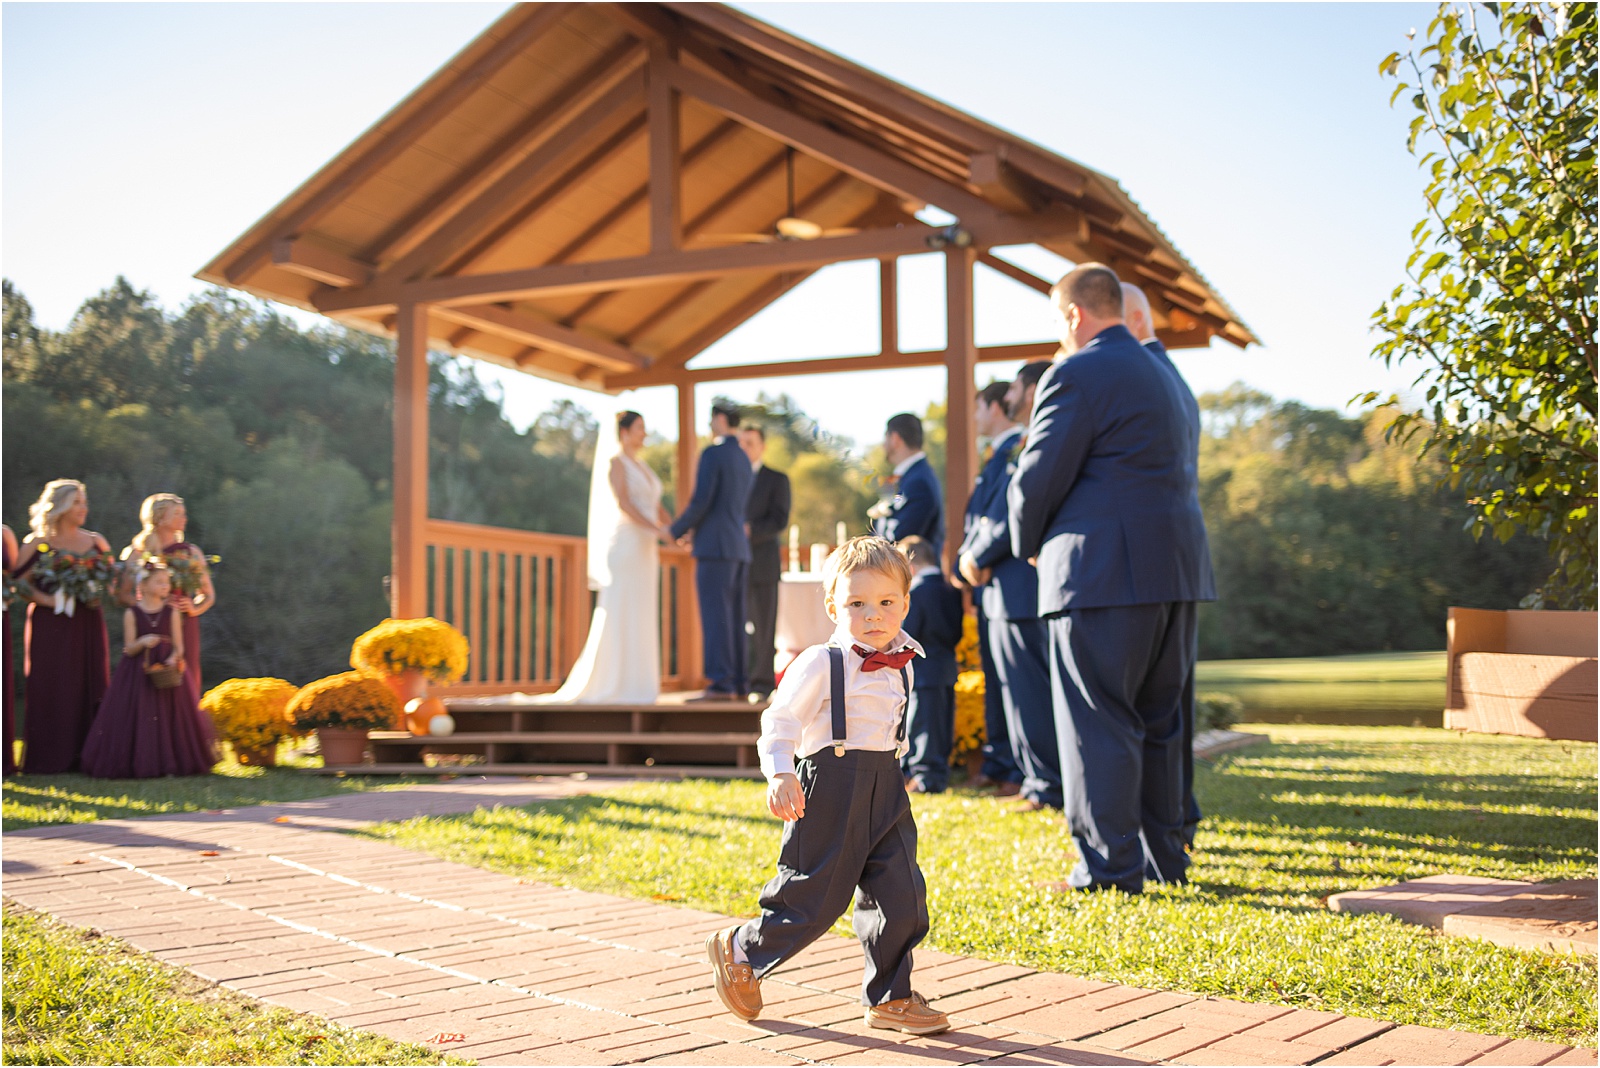 small boy in bow tie walking around at wedding ceremony